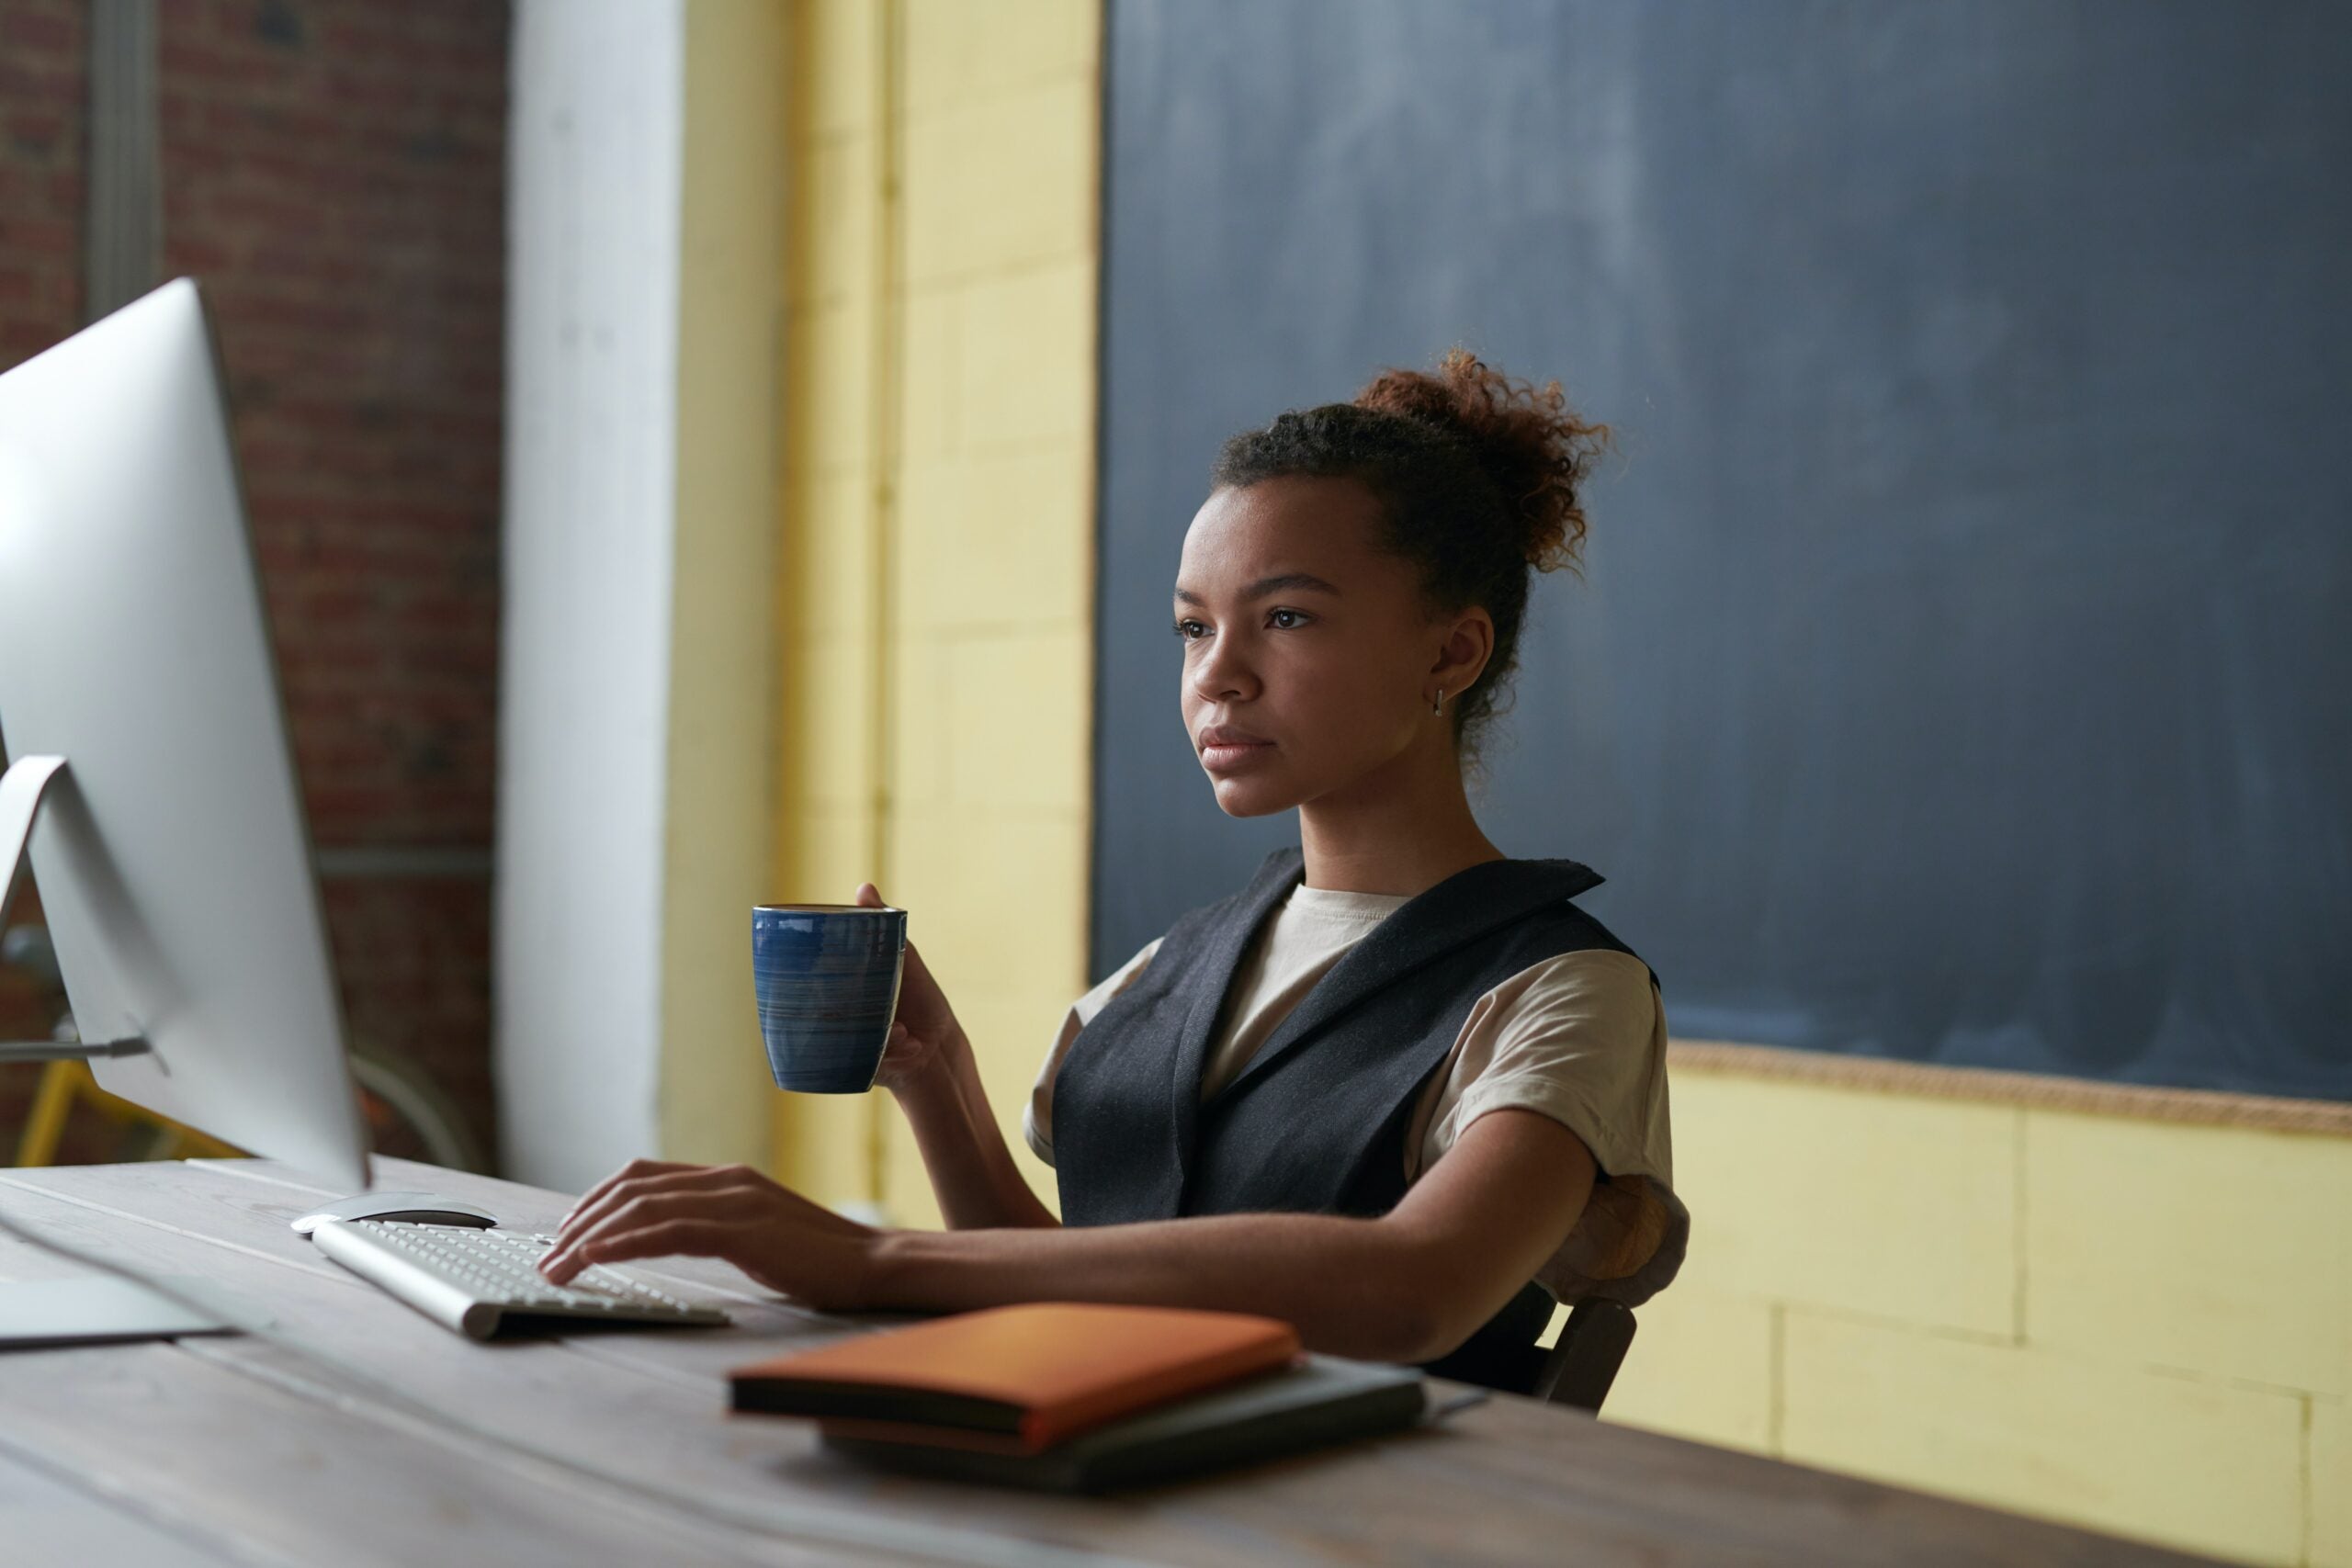 A young Black woman sits at a desktop computer and looks intently at the screen. One hand rests on the keyboard and the other holds a mug of coffee or tea. There is a yellow wall and blackboard behind her and two notebooks stacked on the desk beside her.